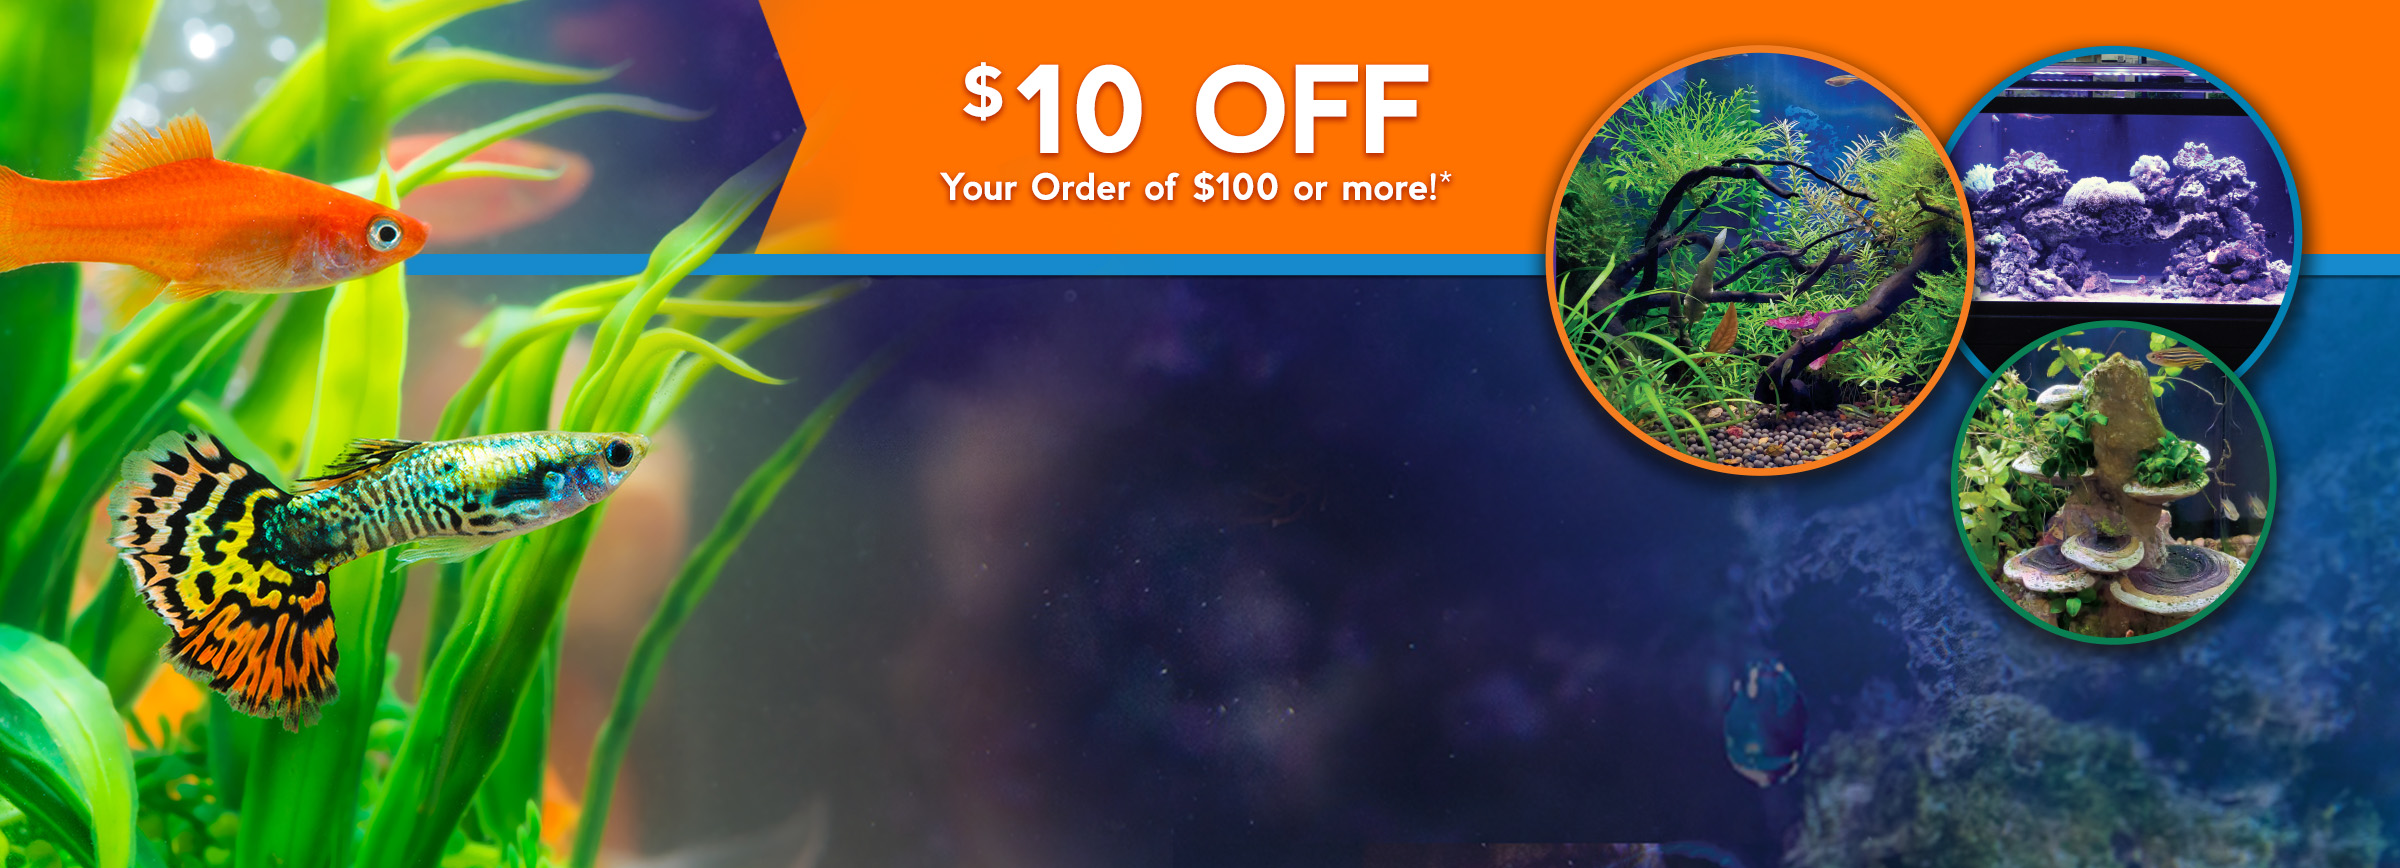 Save $10 off Your Order of $100 or More! Use Promo Code: SITEWIDE10